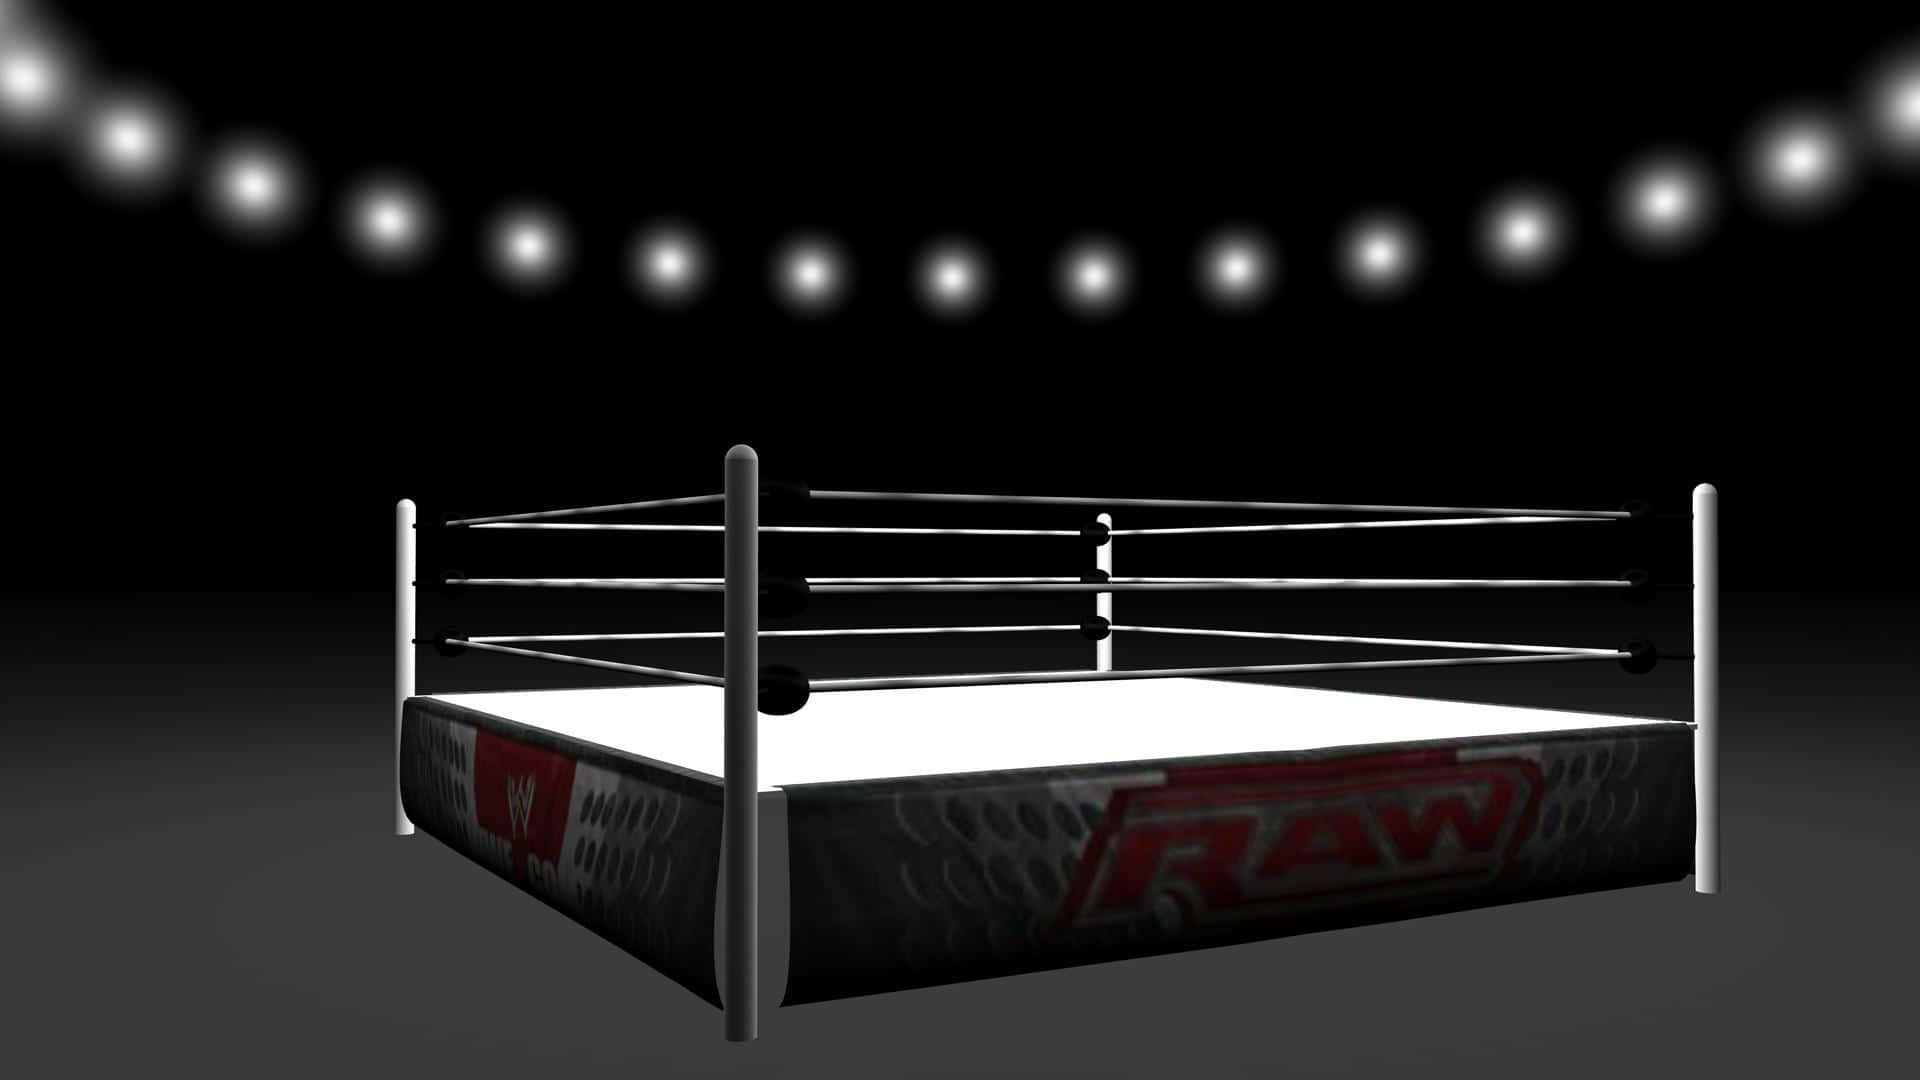 Get Ready for an Epic Match in the Wrestling Ring